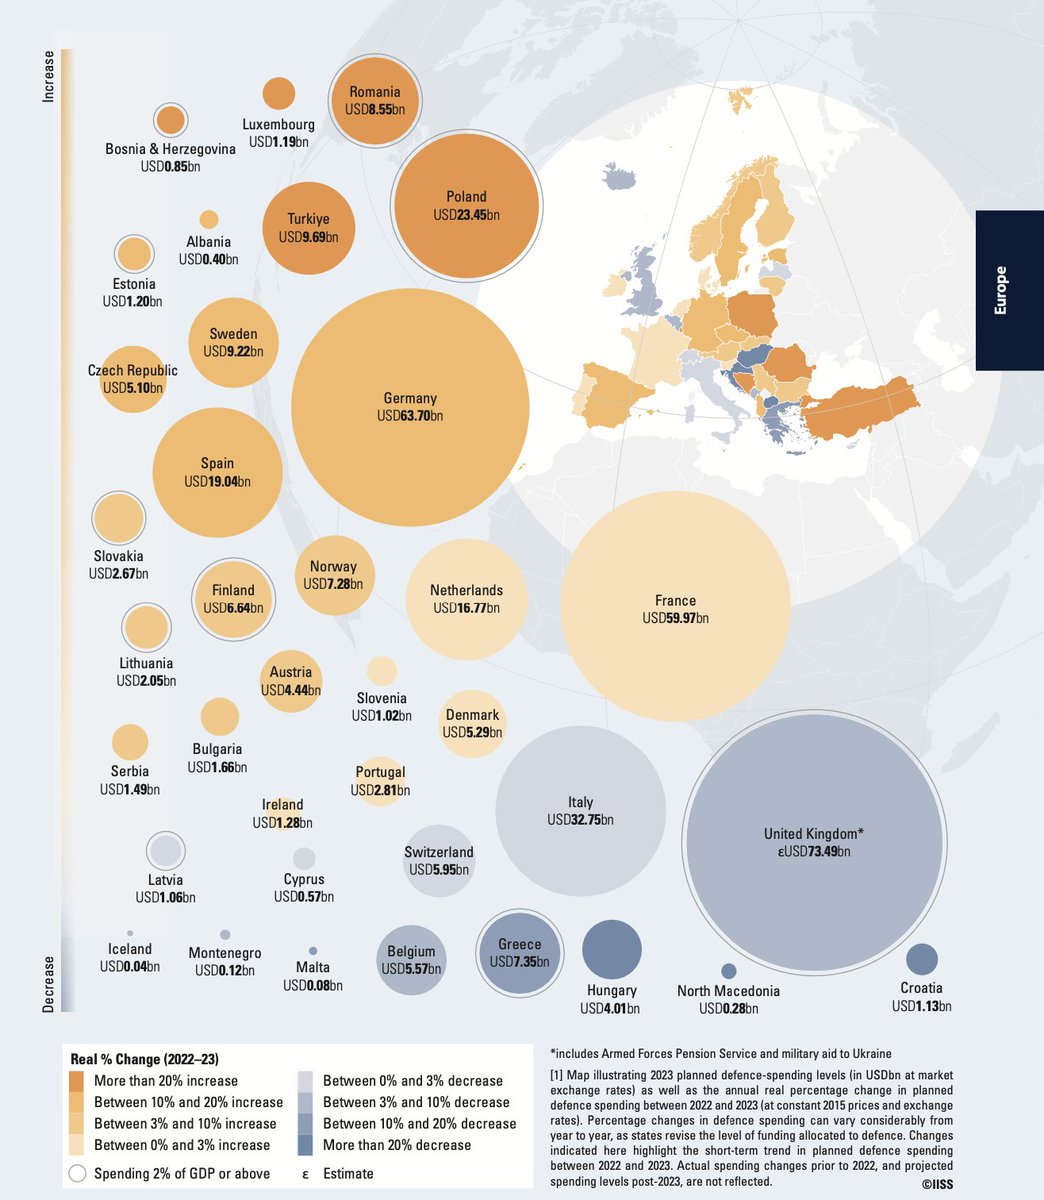 Great data visualisation (as always) from the @IISS_org #MilitaryBalance.